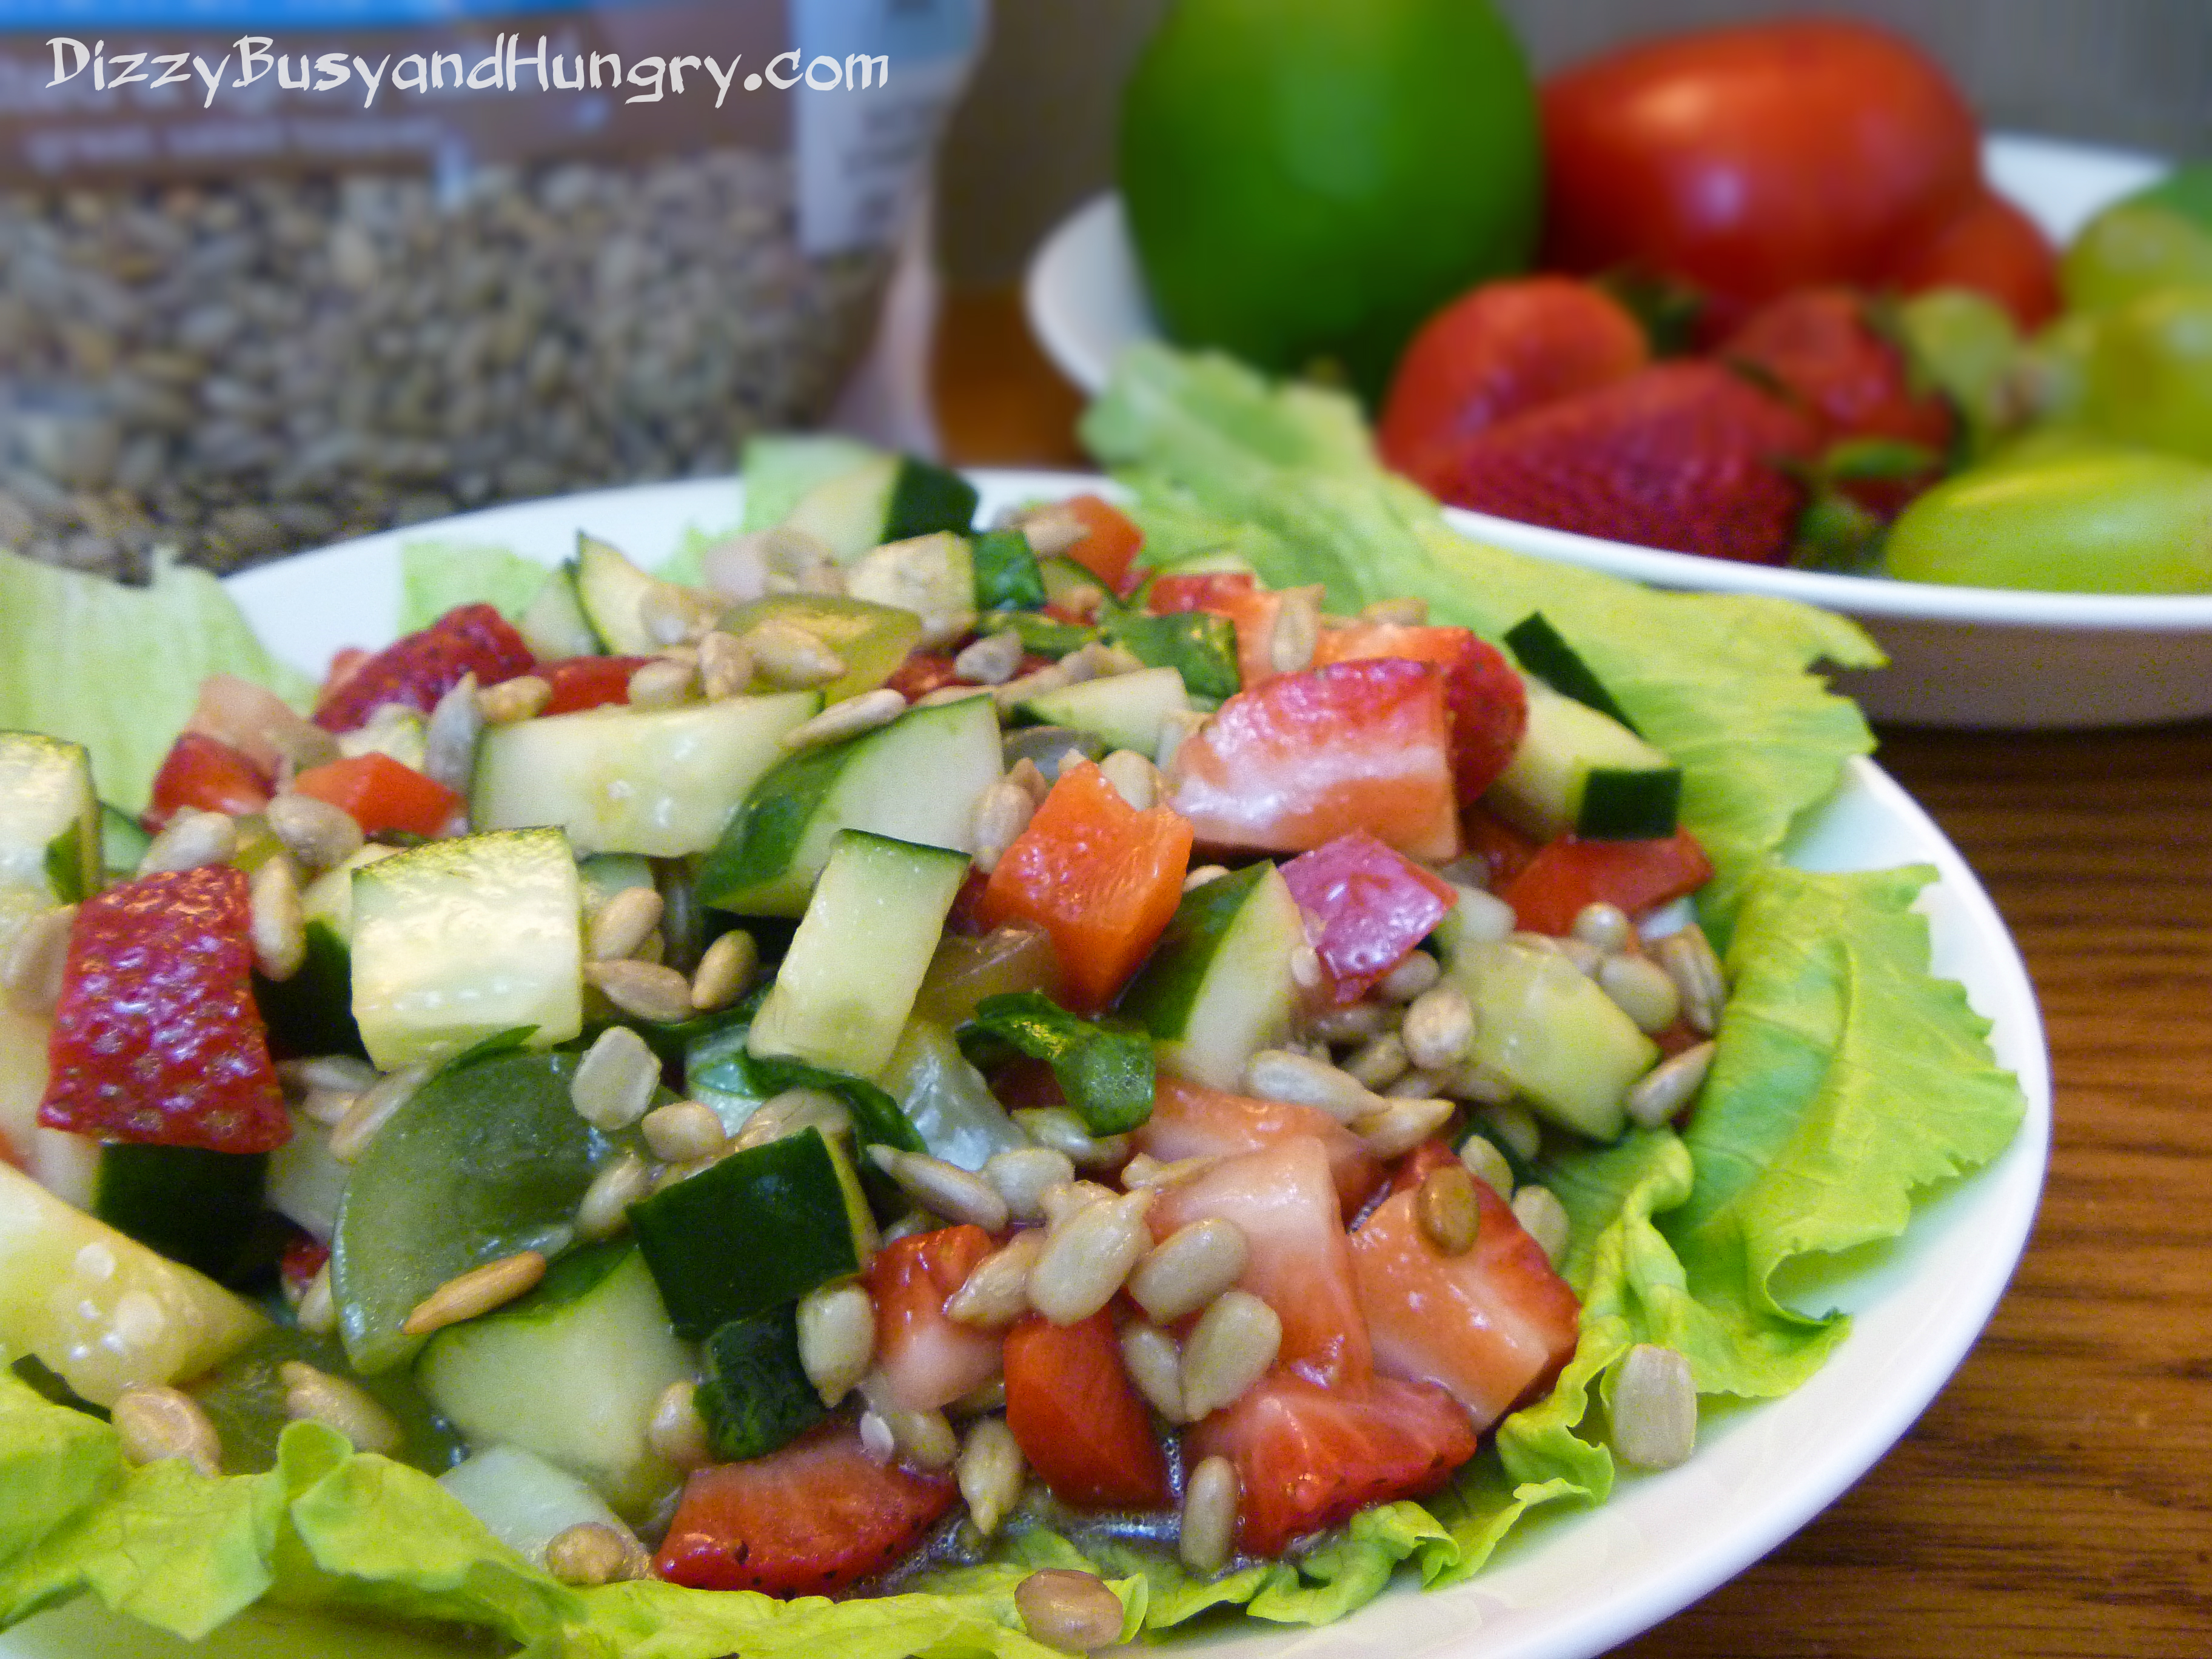 Summer Salad with Fruit and Veggies | Dizzy Busy and Hungry!